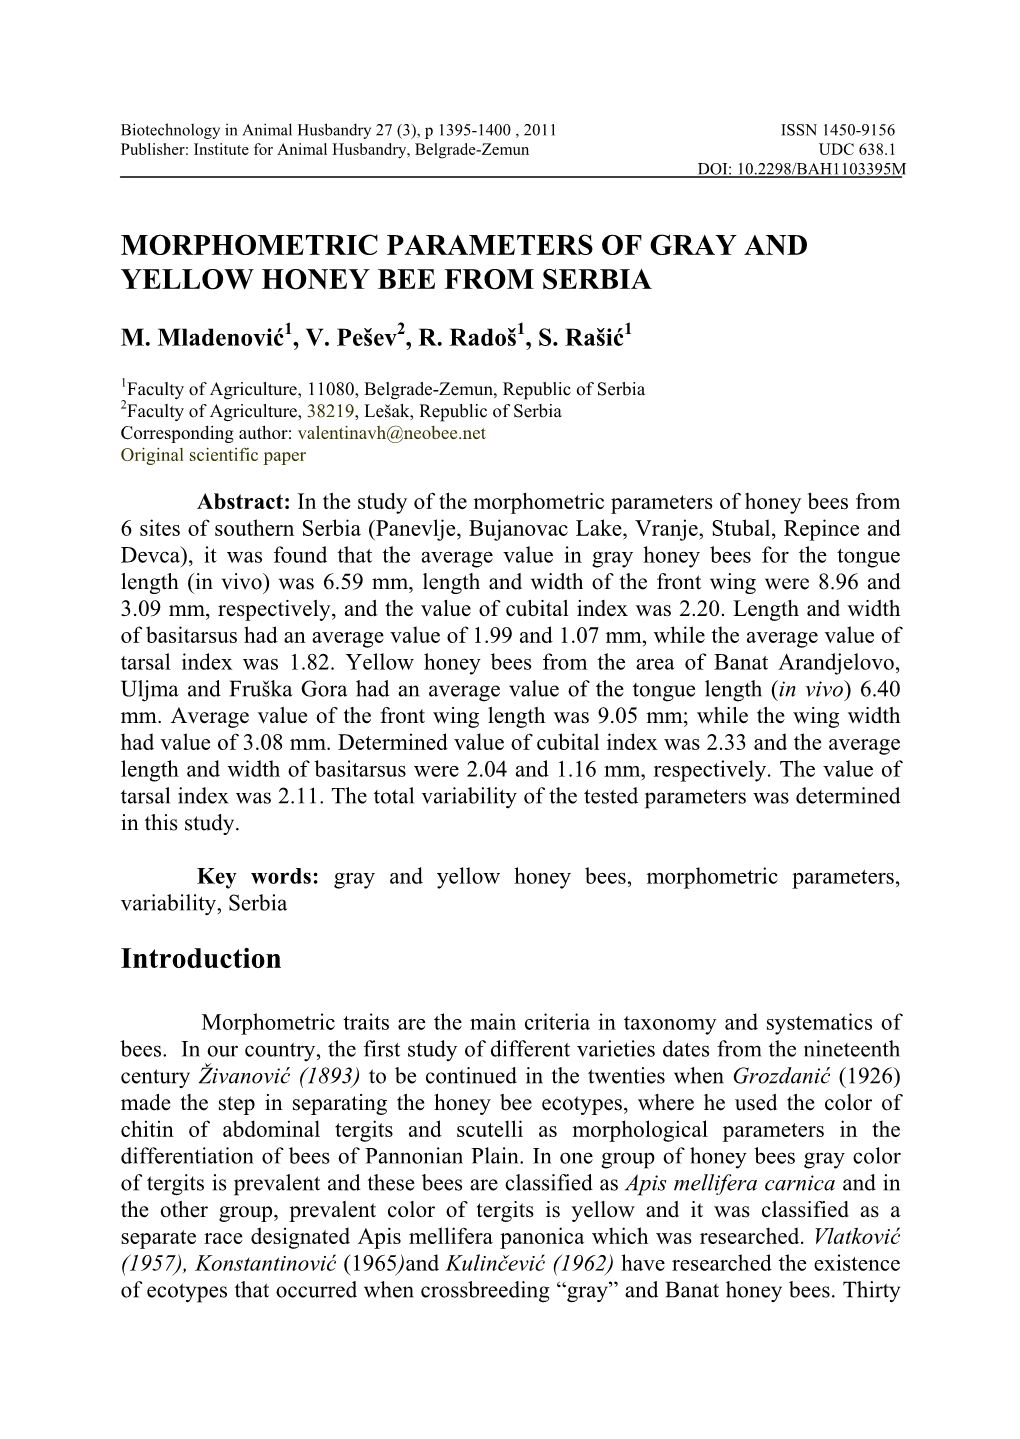 Morphometric Parameters of Gray and Yellow Honey Bee from Serbia